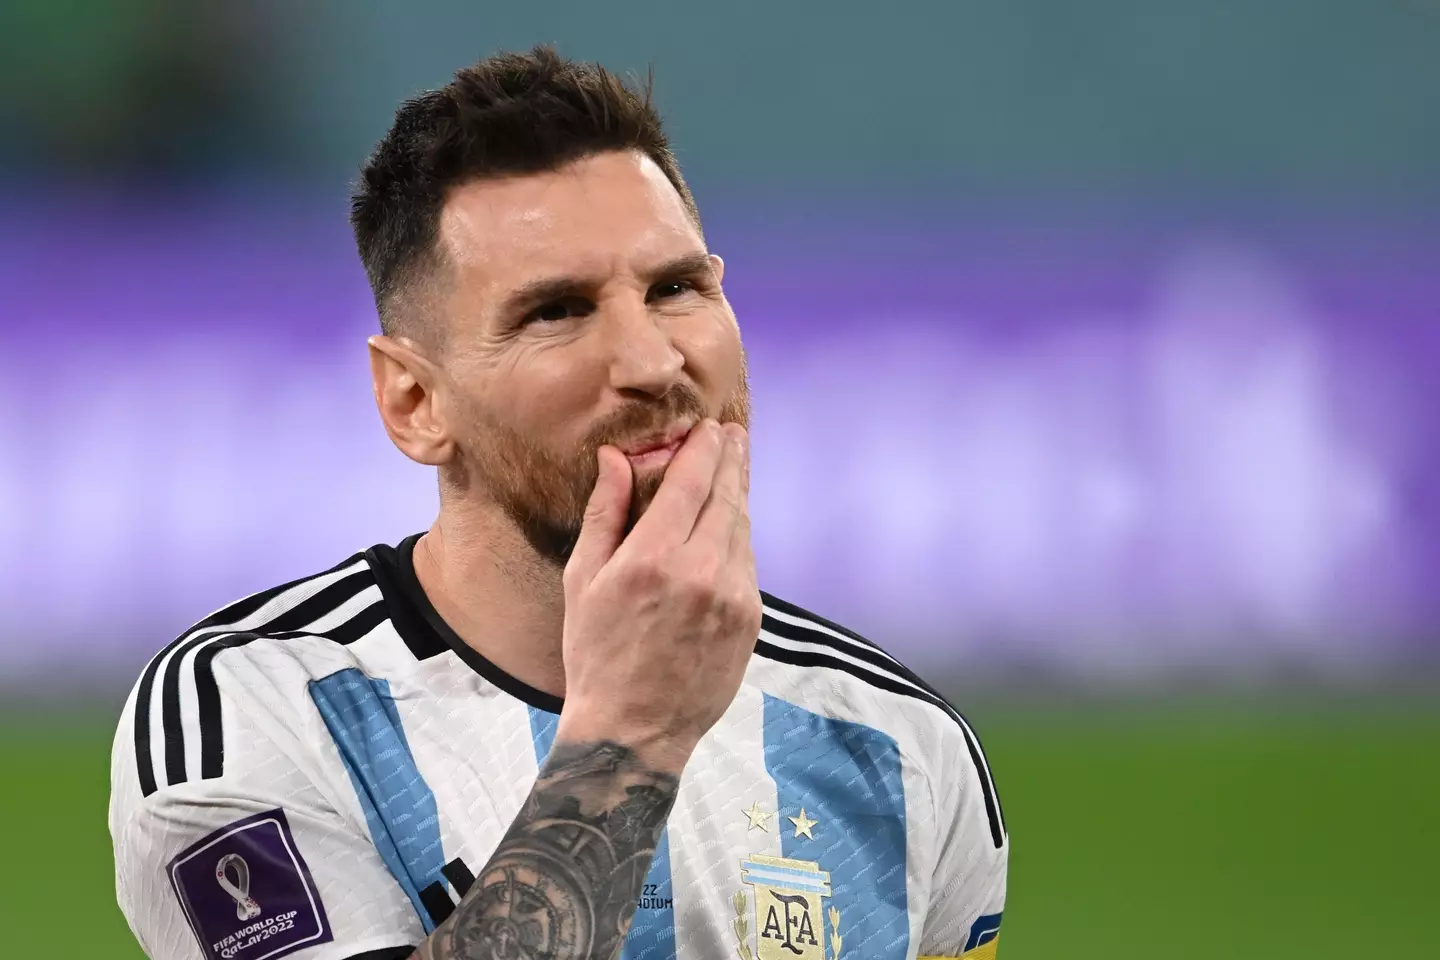 Messi confirmed earlier this year this will be his final World Cup as a player. (Image